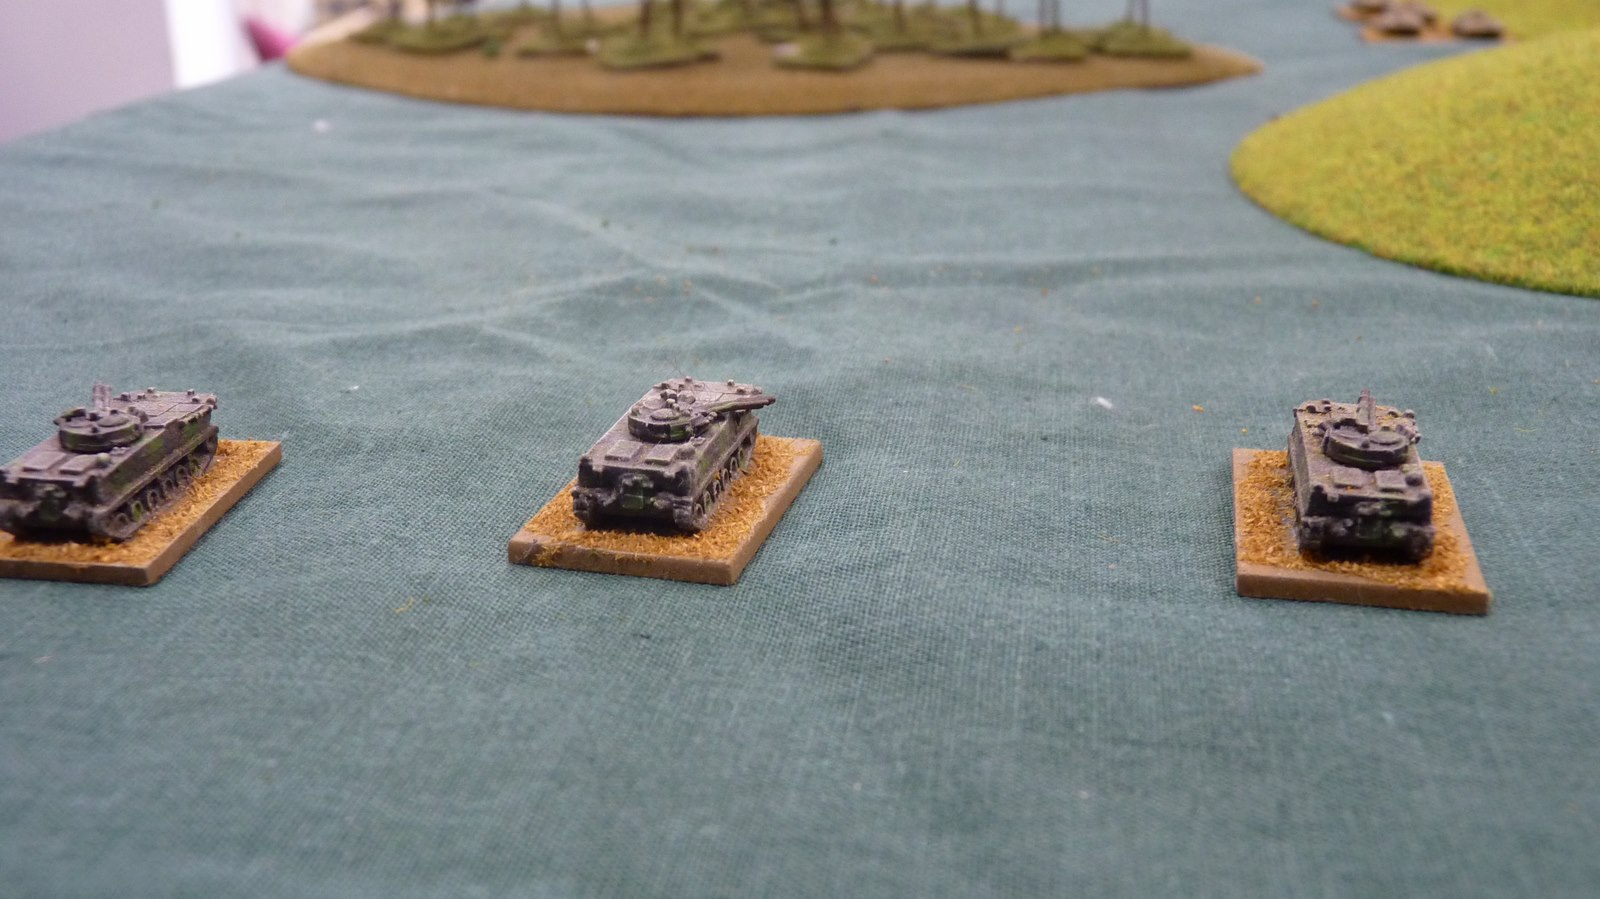 The Chinese 1st platoon advanced to outflank the defenders from the left